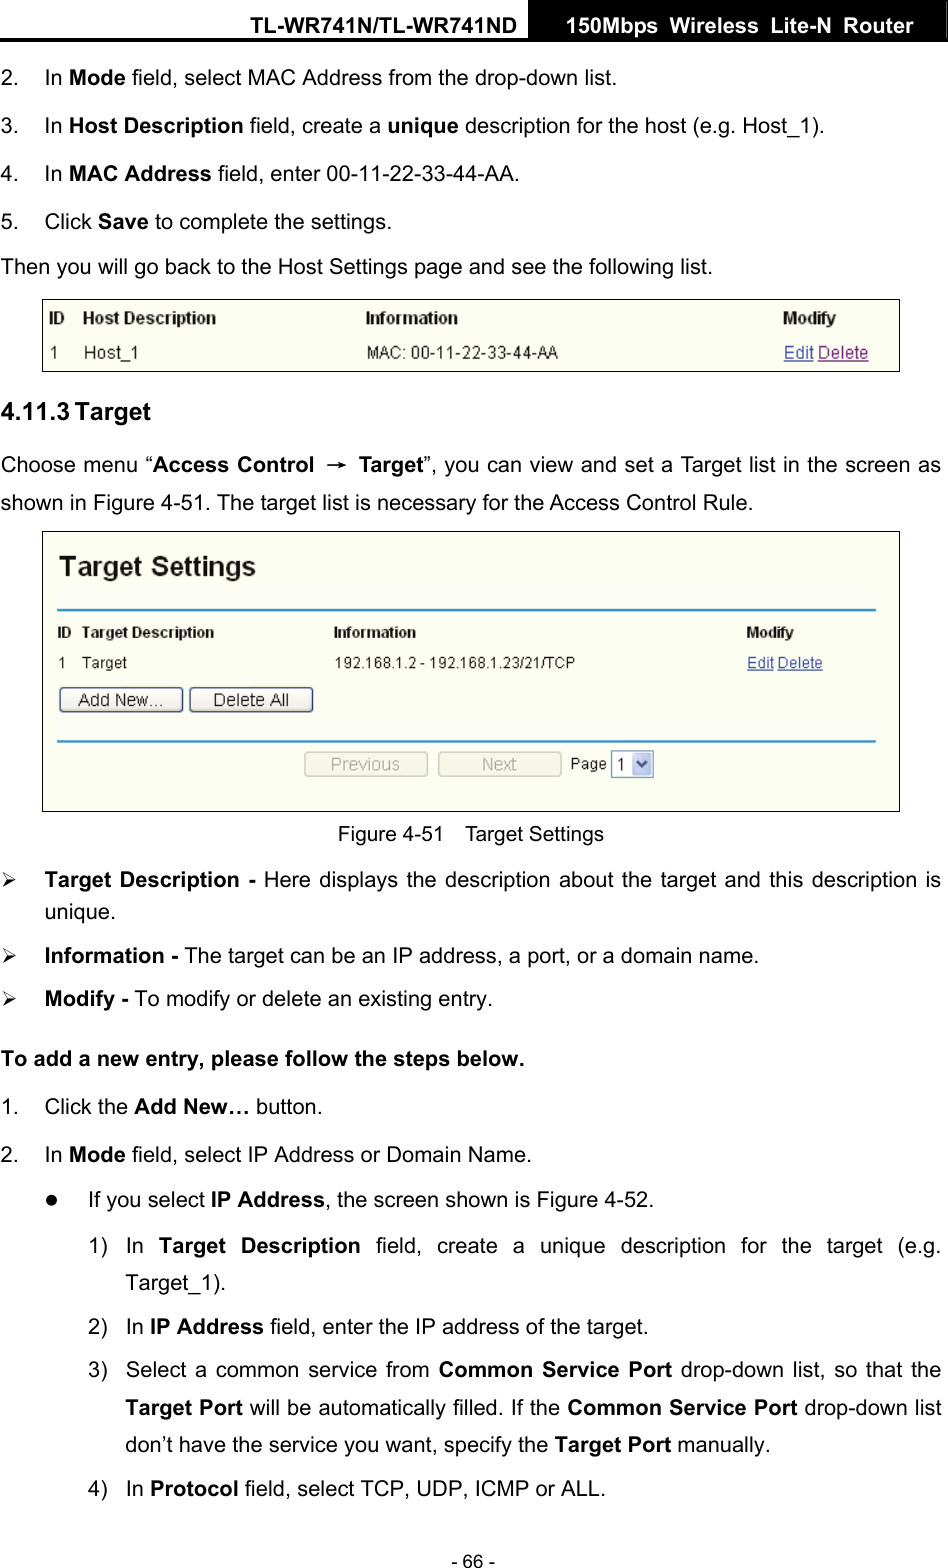 TL-WR741N/TL-WR741ND  150Mbps Wireless Lite-N Router   - 66 - 2. In Mode field, select MAC Address from the drop-down list.   3. In Host Description field, create a unique description for the host (e.g. Host_1).   4. In MAC Address field, enter 00-11-22-33-44-AA.   5. Click Save to complete the settings.   Then you will go back to the Host Settings page and see the following list.  4.11.3 Target Choose menu “Access Control  → Target”, you can view and set a Target list in the screen as shown in Figure 4-51. The target list is necessary for the Access Control Rule.  Figure 4-51  Target Settings ¾ Target Description - Here displays the description about the target and this description is unique.  ¾ Information - The target can be an IP address, a port, or a domain name.   ¾ Modify - To modify or delete an existing entry. To add a new entry, please follow the steps below. 1. Click the Add New… button. 2. In Mode field, select IP Address or Domain Name. z If you select IP Address, the screen shown is Figure 4-52.   1) In Target Description field, create a unique description for the target (e.g. Target_1). 2) In IP Address field, enter the IP address of the target. 3)  Select a common service from Common Service Port drop-down list, so that the Target Port will be automatically filled. If the Common Service Port drop-down list don’t have the service you want, specify the Target Port manually. 4) In Protocol field, select TCP, UDP, ICMP or ALL.  